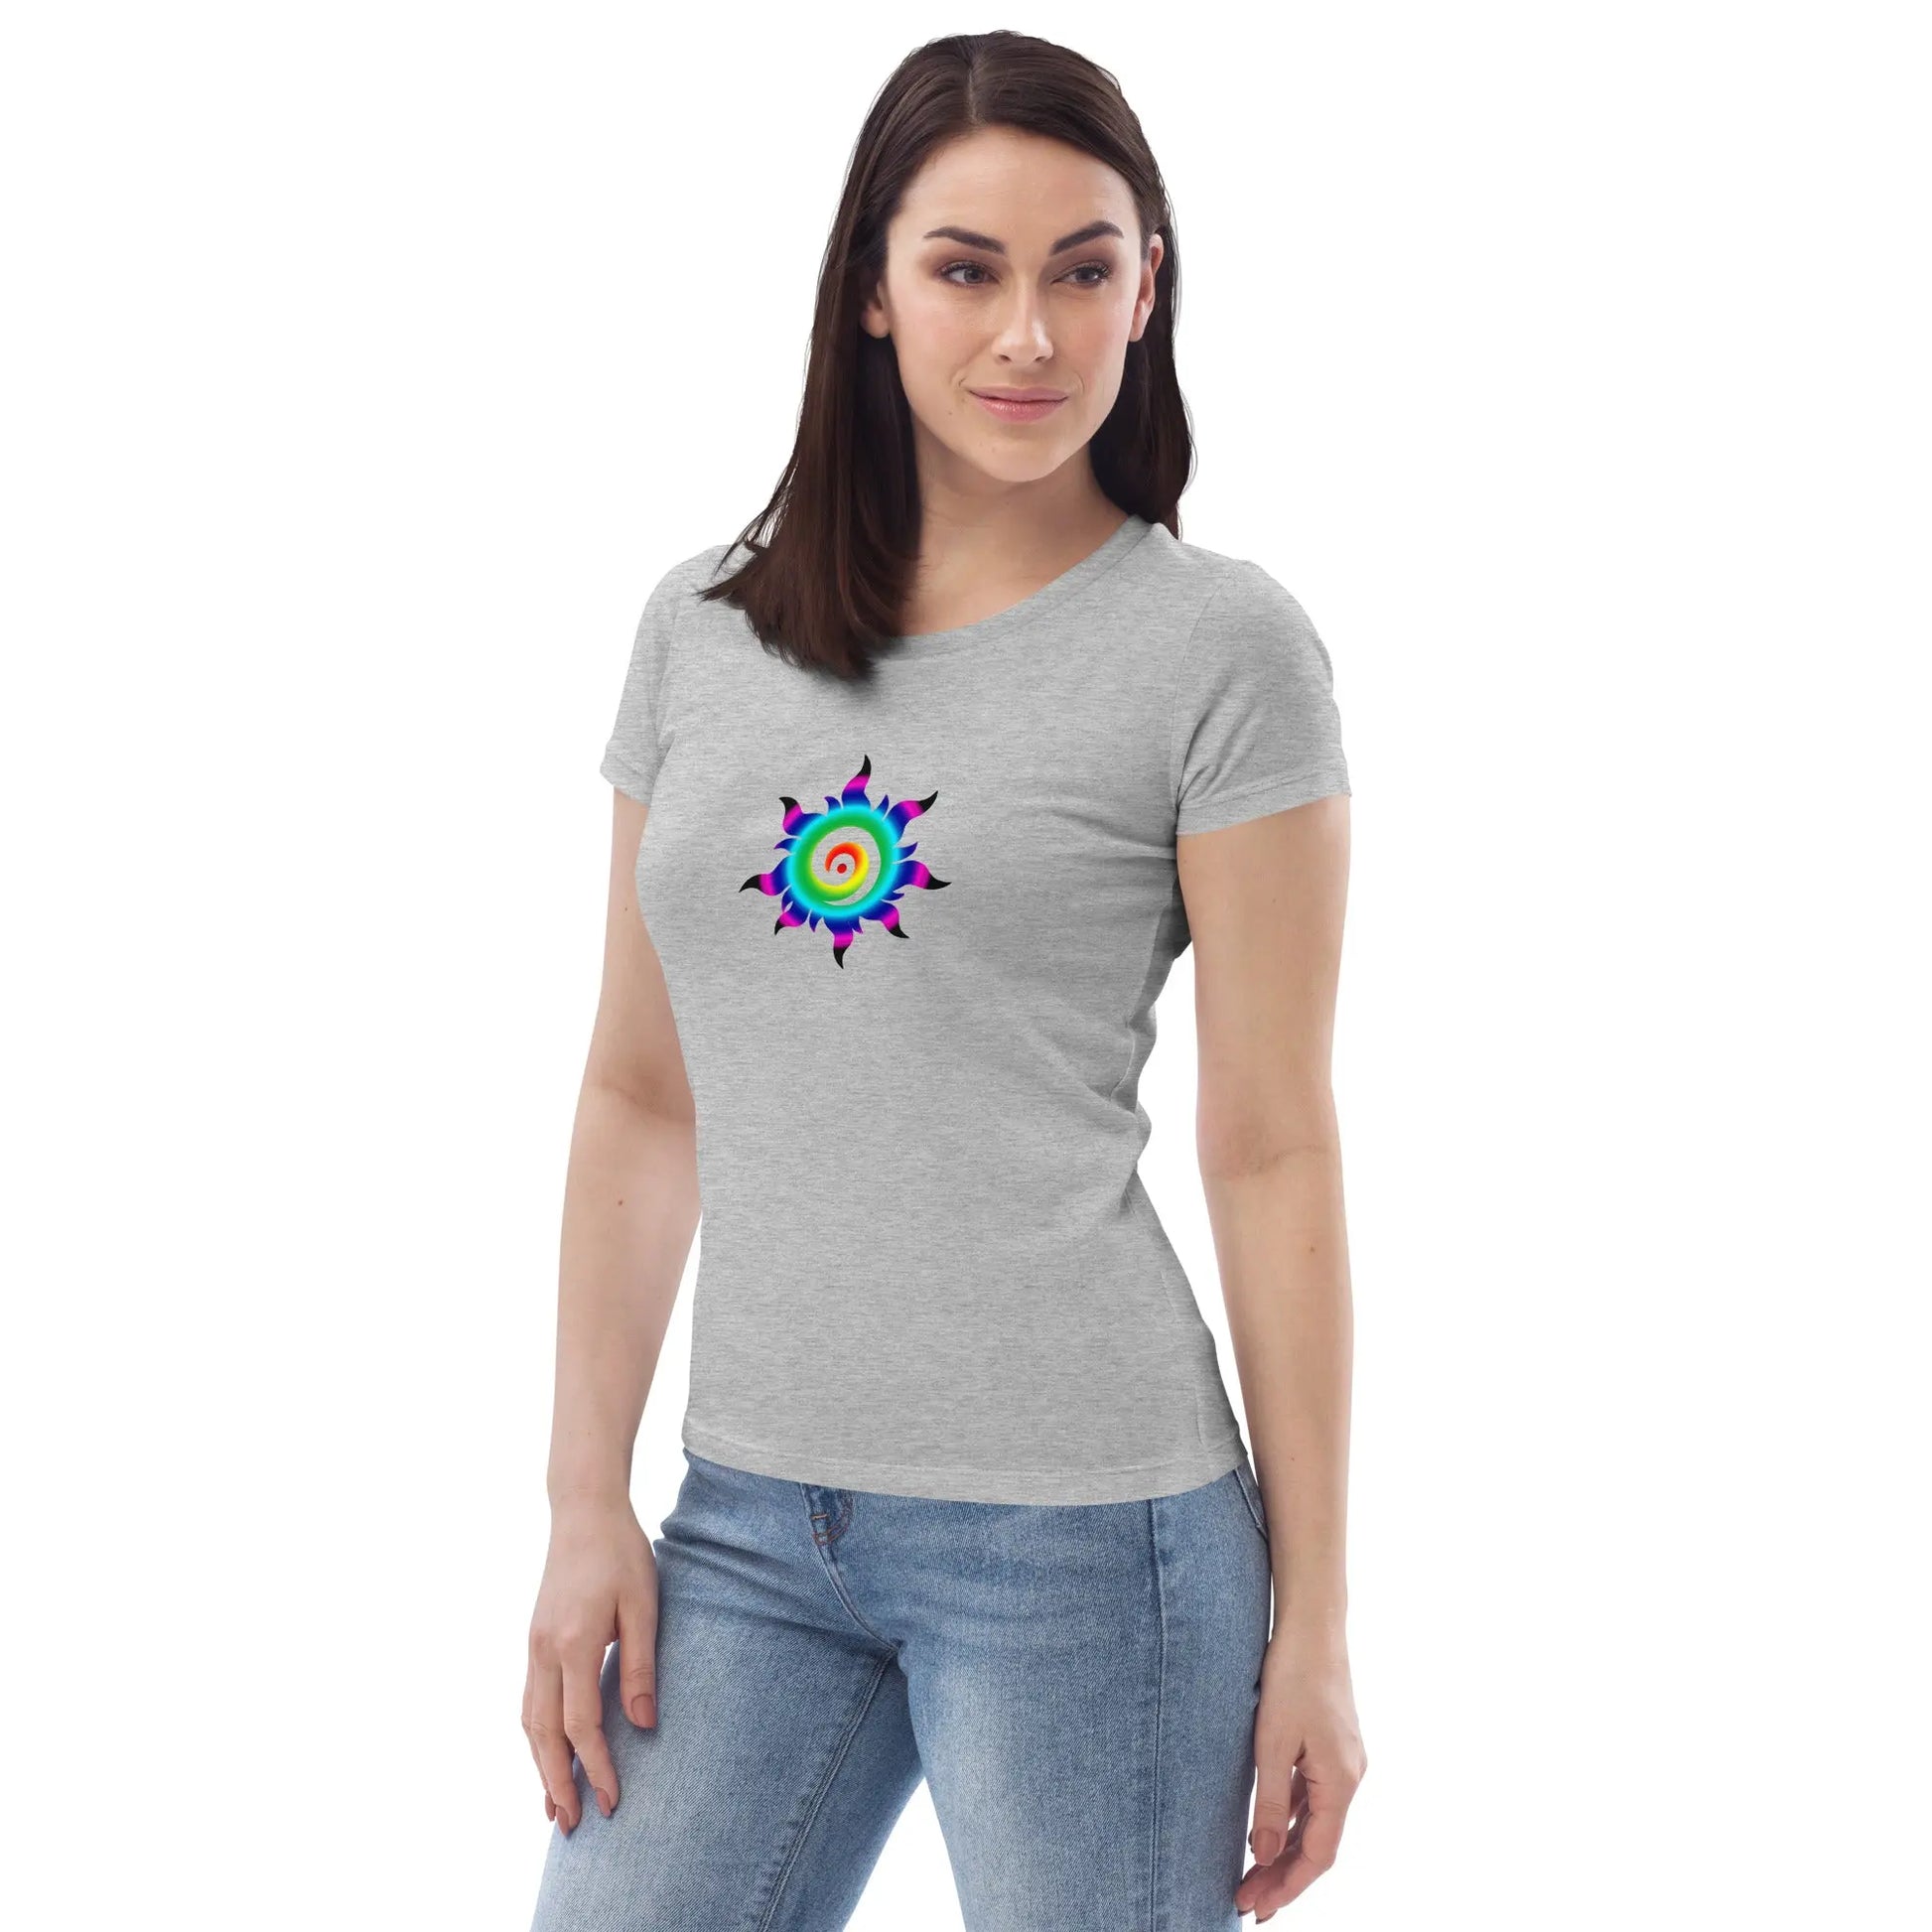 Women's fitted eco tee ActSunx - Image #19